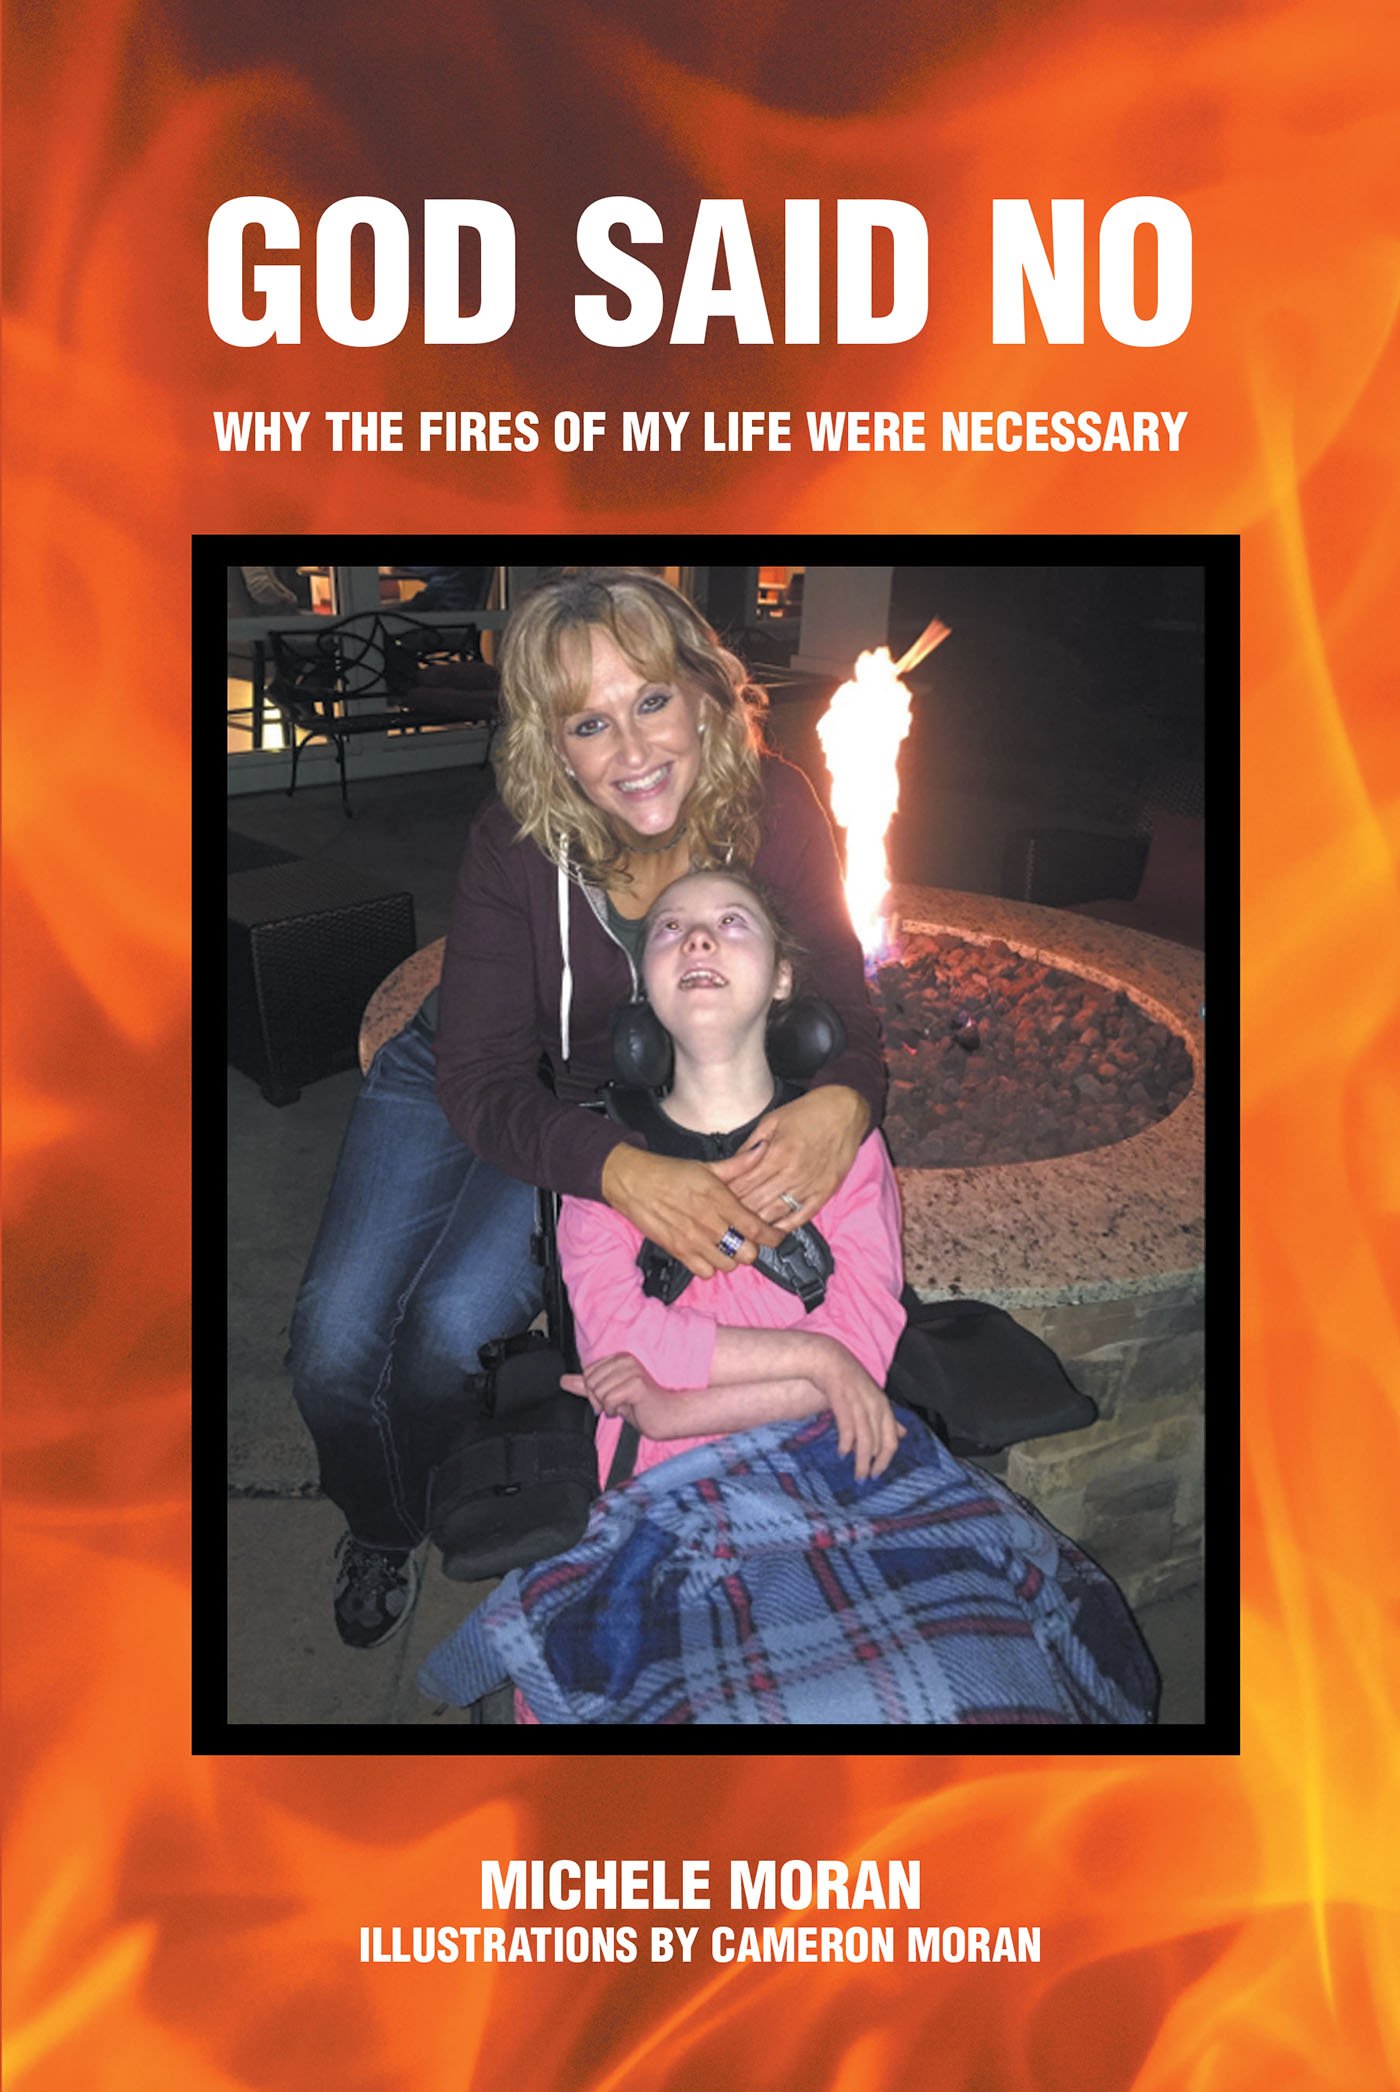 Michele Moran’s Newly Released “God Said No: Why the fires of my life were necessary” is a Powerful Message Hope That Explores a Profound Spiritual Journey